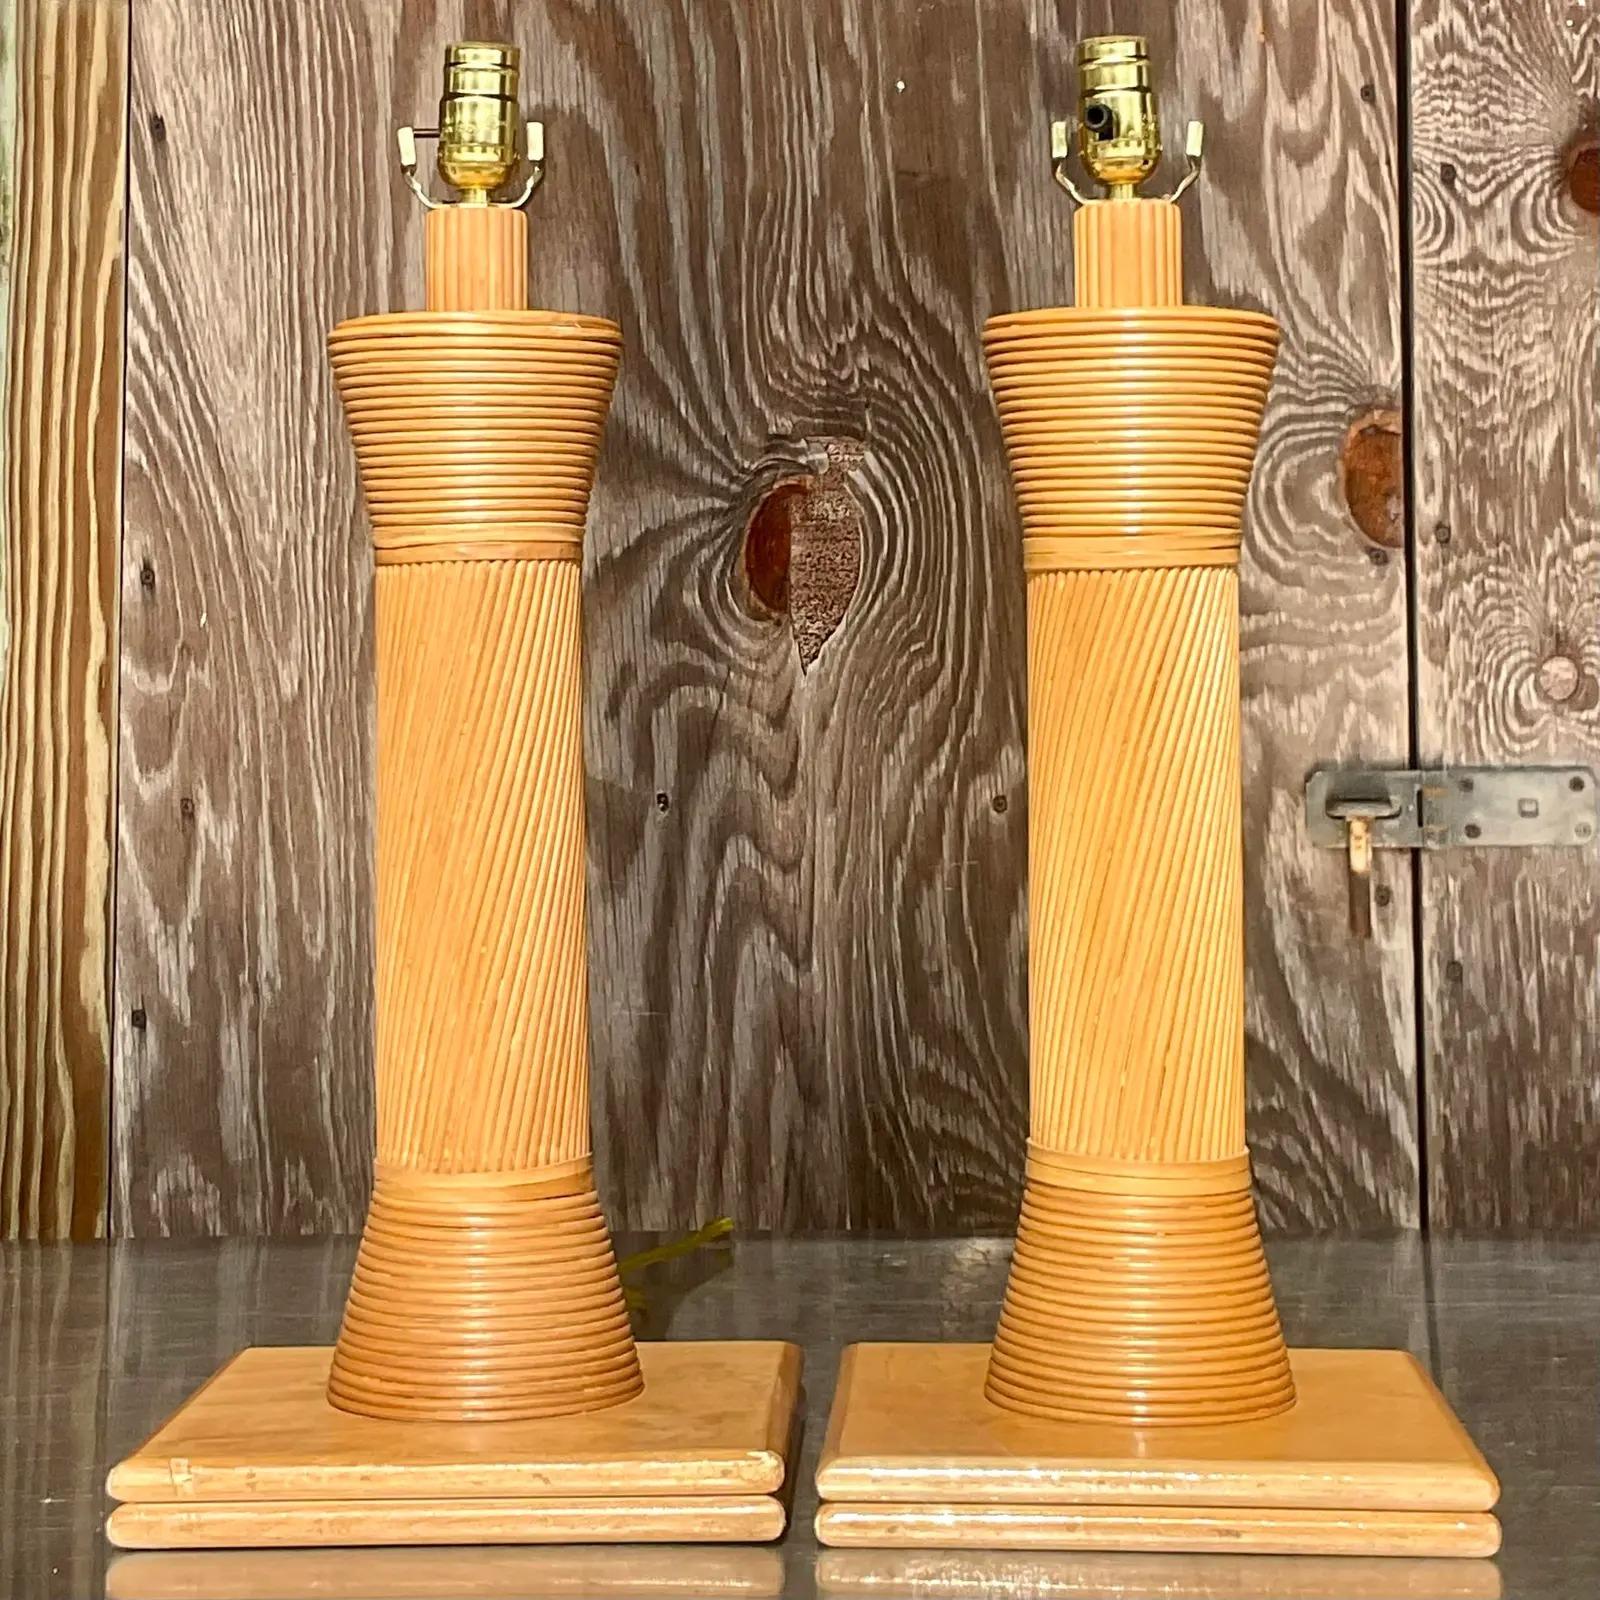 A spectacular pair of vintage Coastal table lamps. Beautiful pencil reed in a chic multi directional design. Rest on wood plinths. Acquired from a Palm Beach estate.